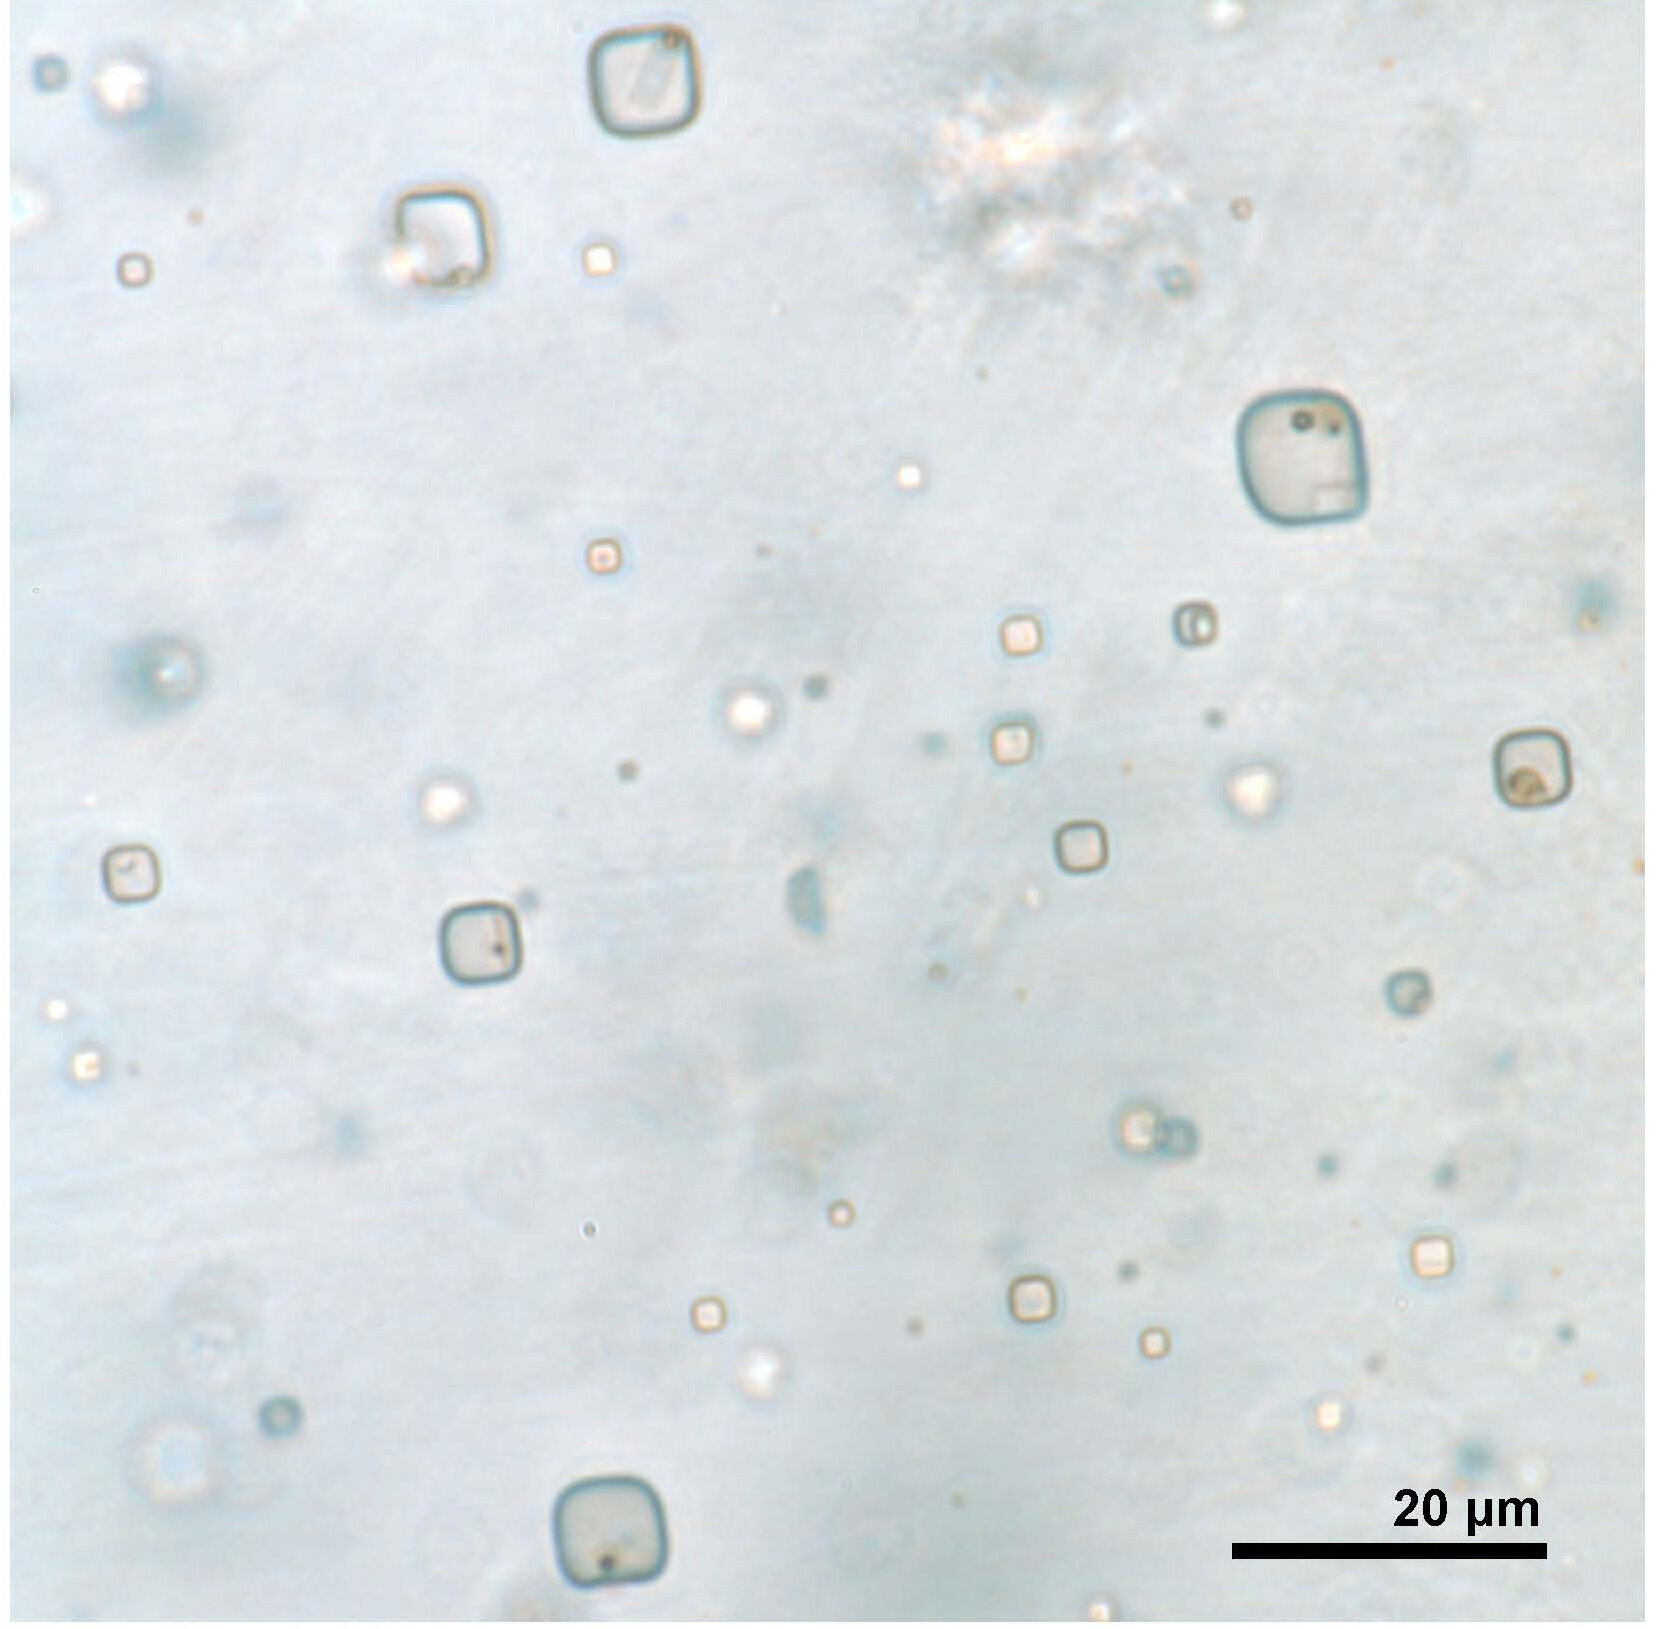 Ancient microorganisms found in halite may have implications for search for life